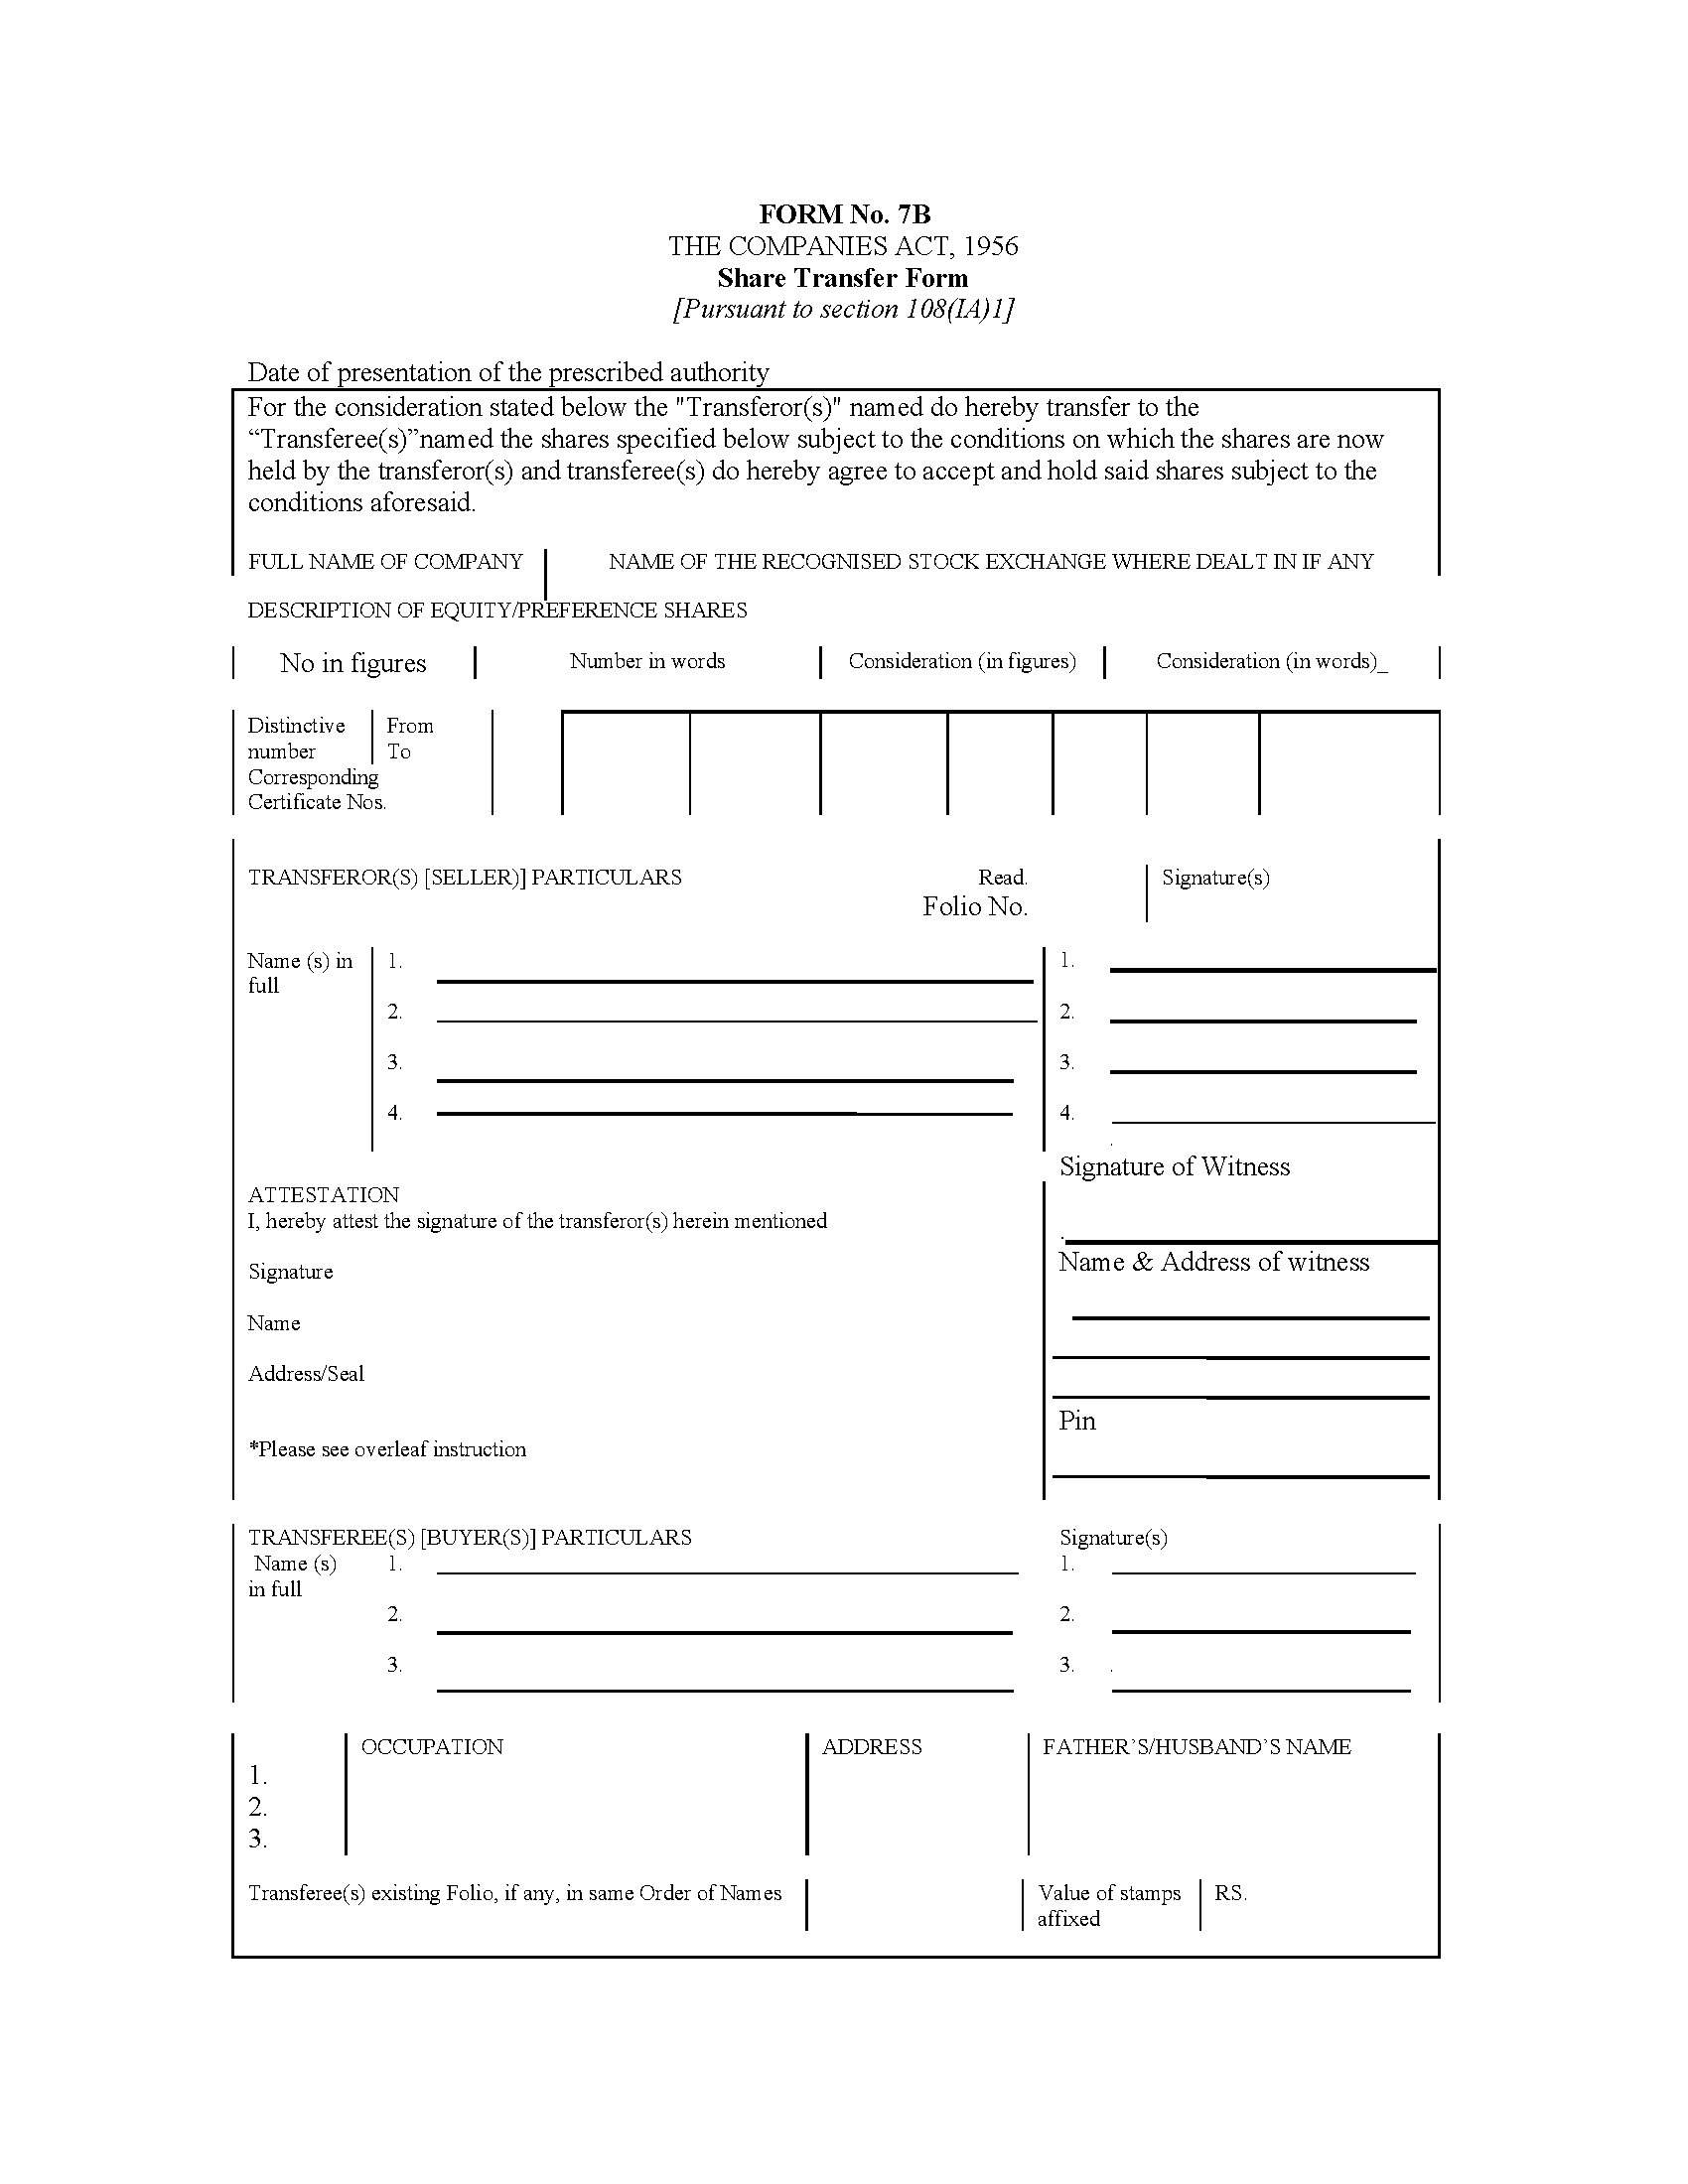 12 - FORM No. 7B Share Transfer Form [Pursuant to section 108(IA)1]-converted 